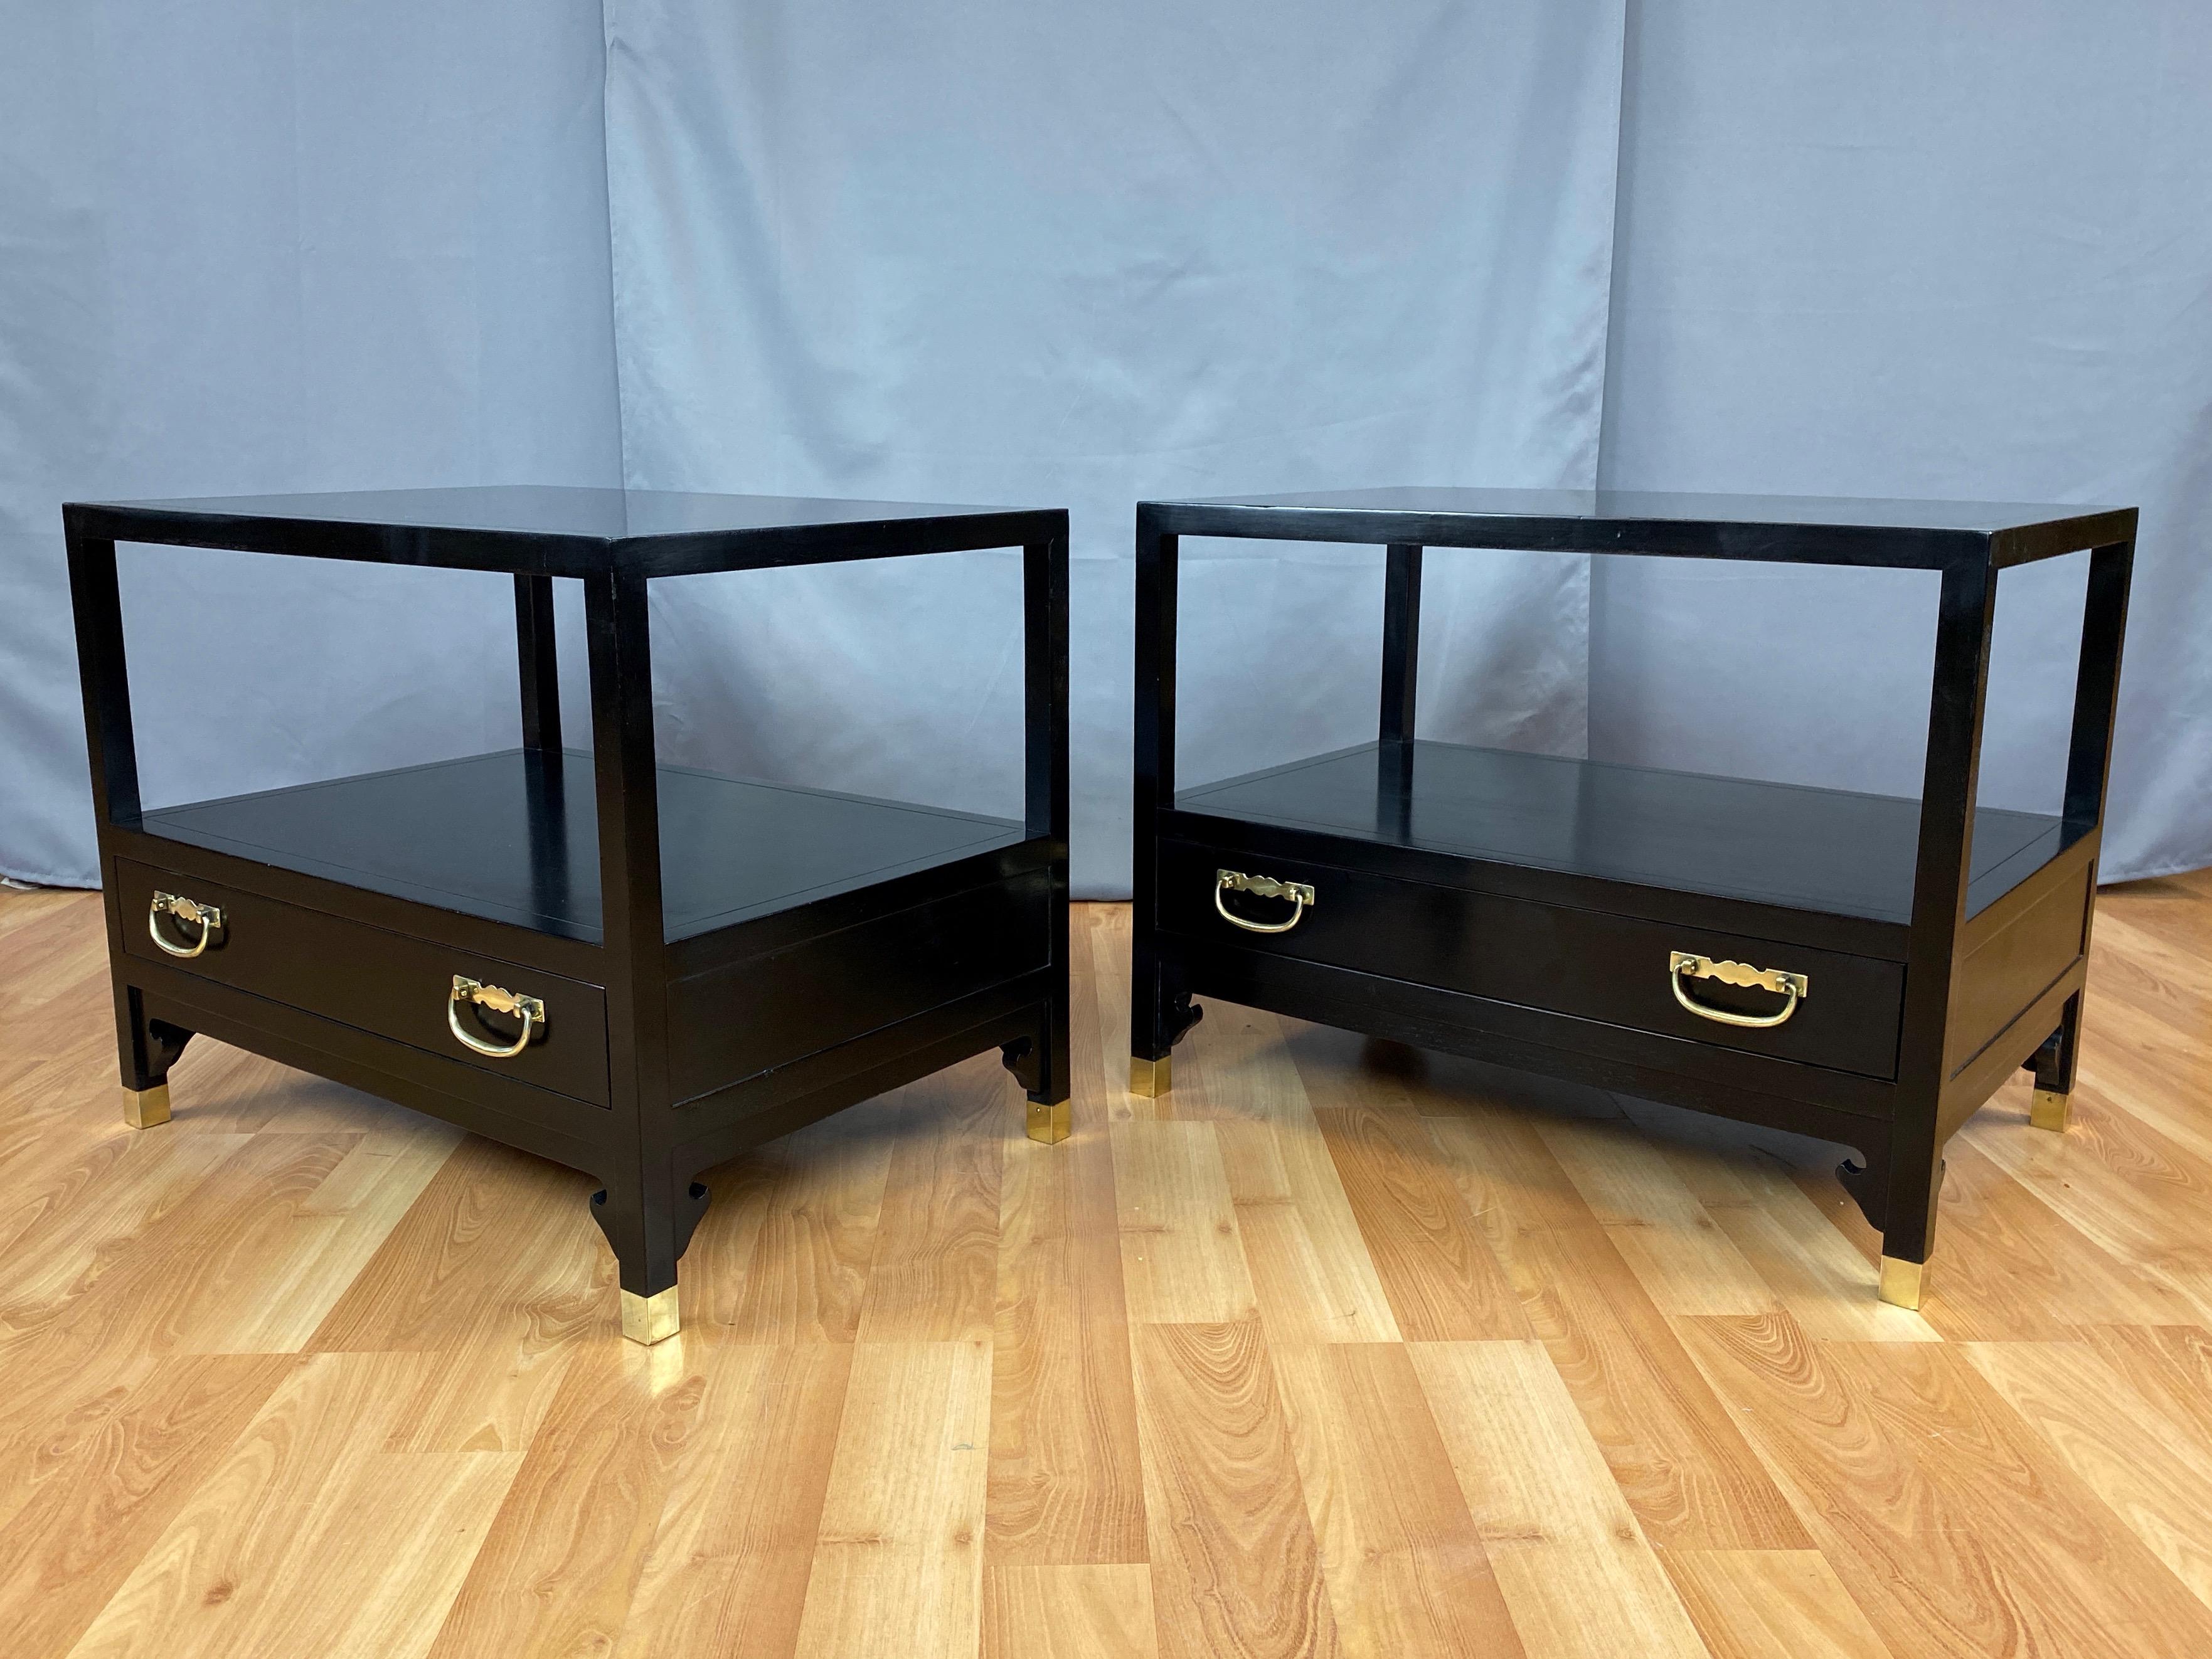 A pair of uncommon and chic Hollywood Regency side or end tables with drawers by Michael Taylor for Baker Furniture.

Solid walnut with satin black lacquer finish. Single drawer with a pair of brass pulls that's accented by handsome flush-fit